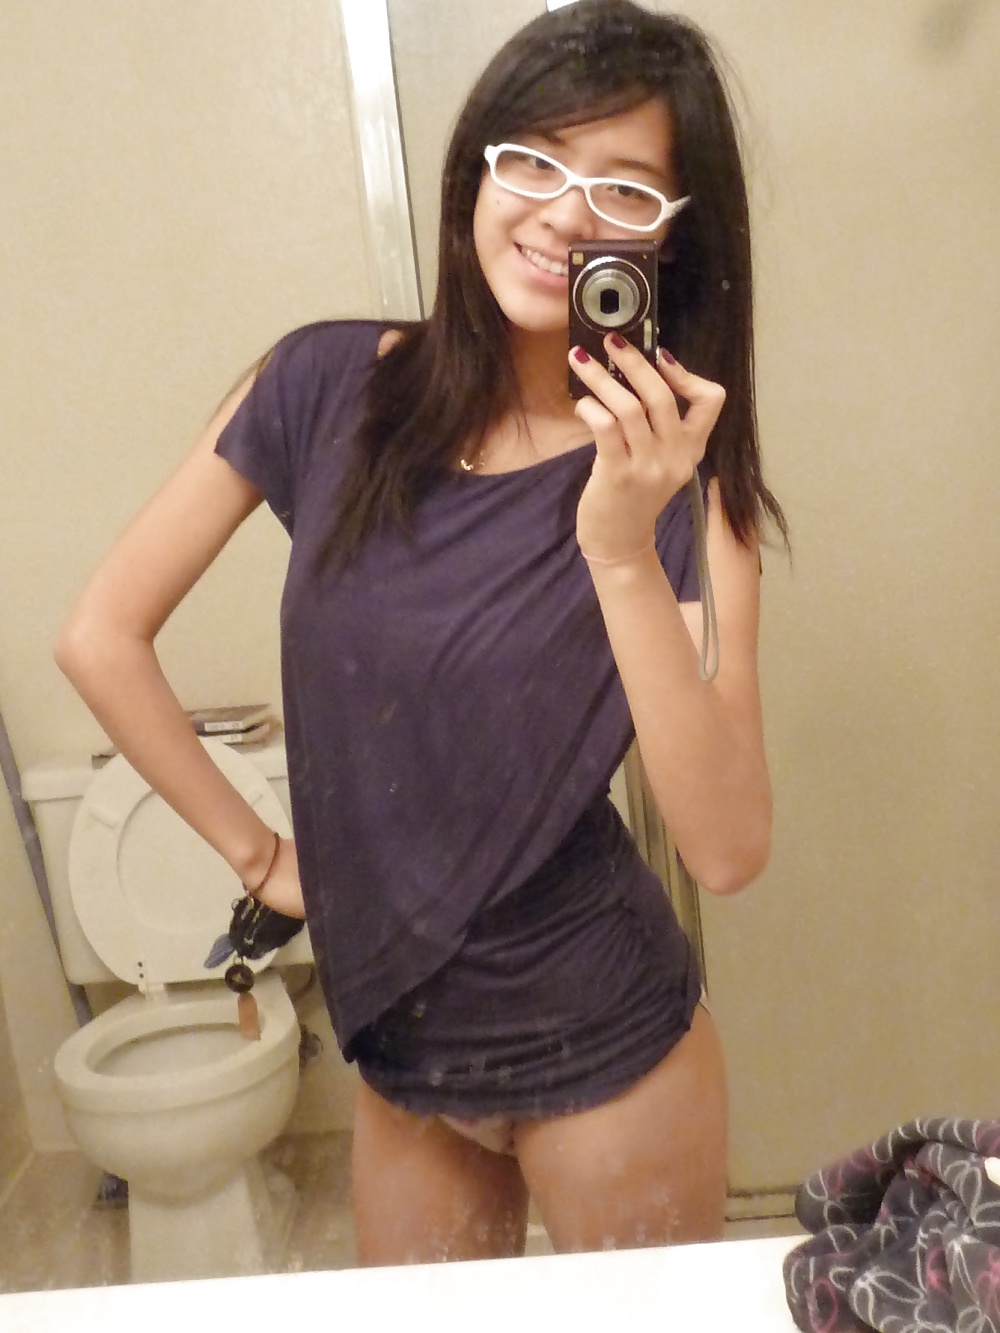 Sexy asian teen with glasses #30188319